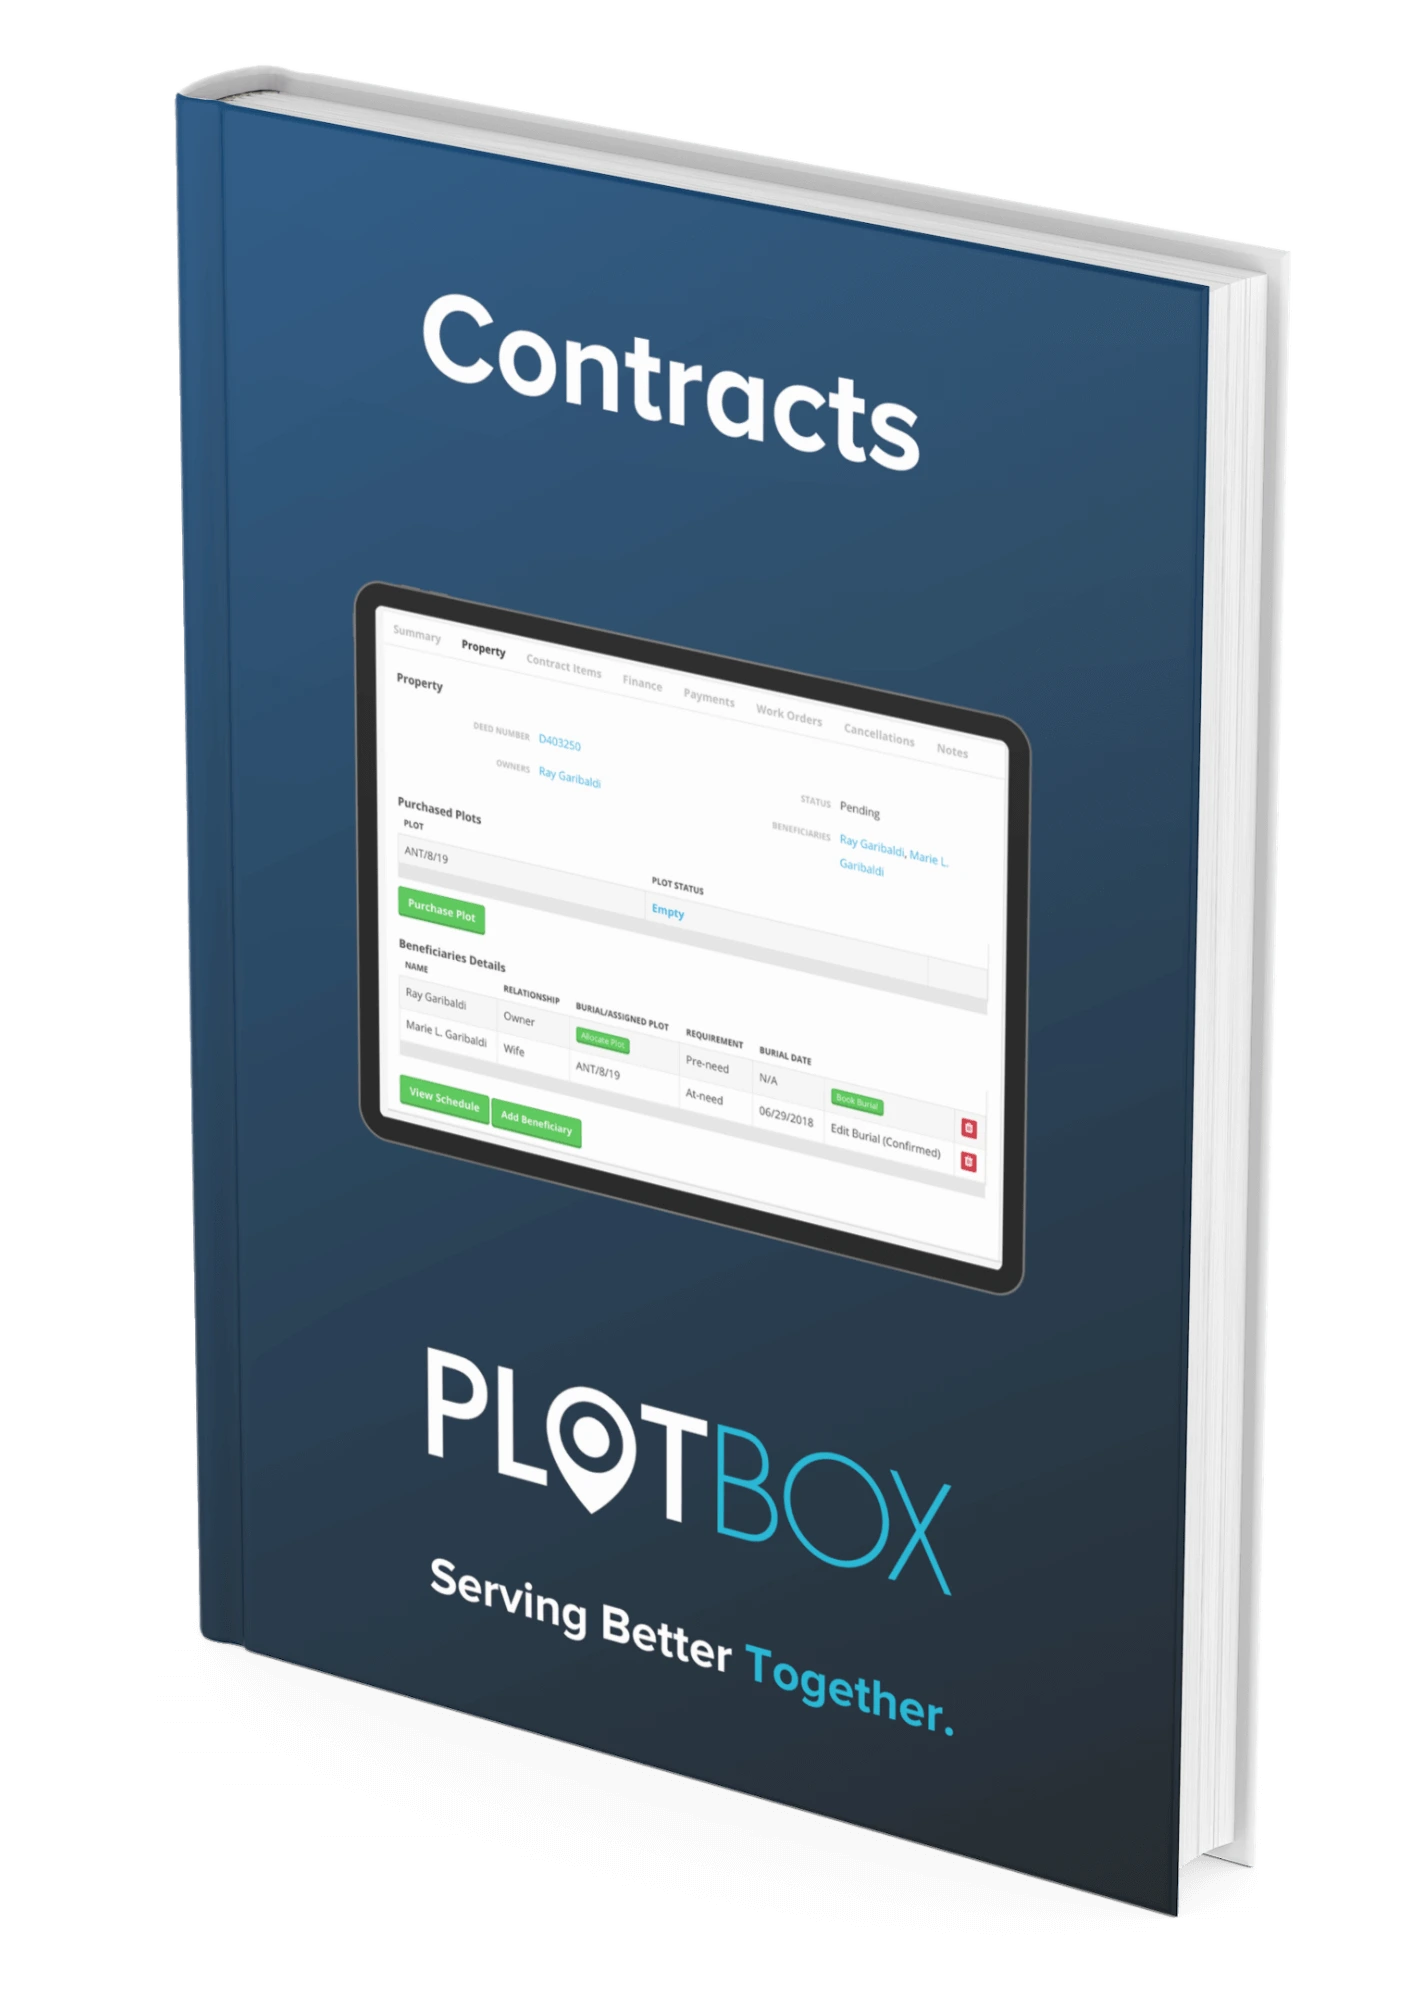 PlotBox - Contracts Download 